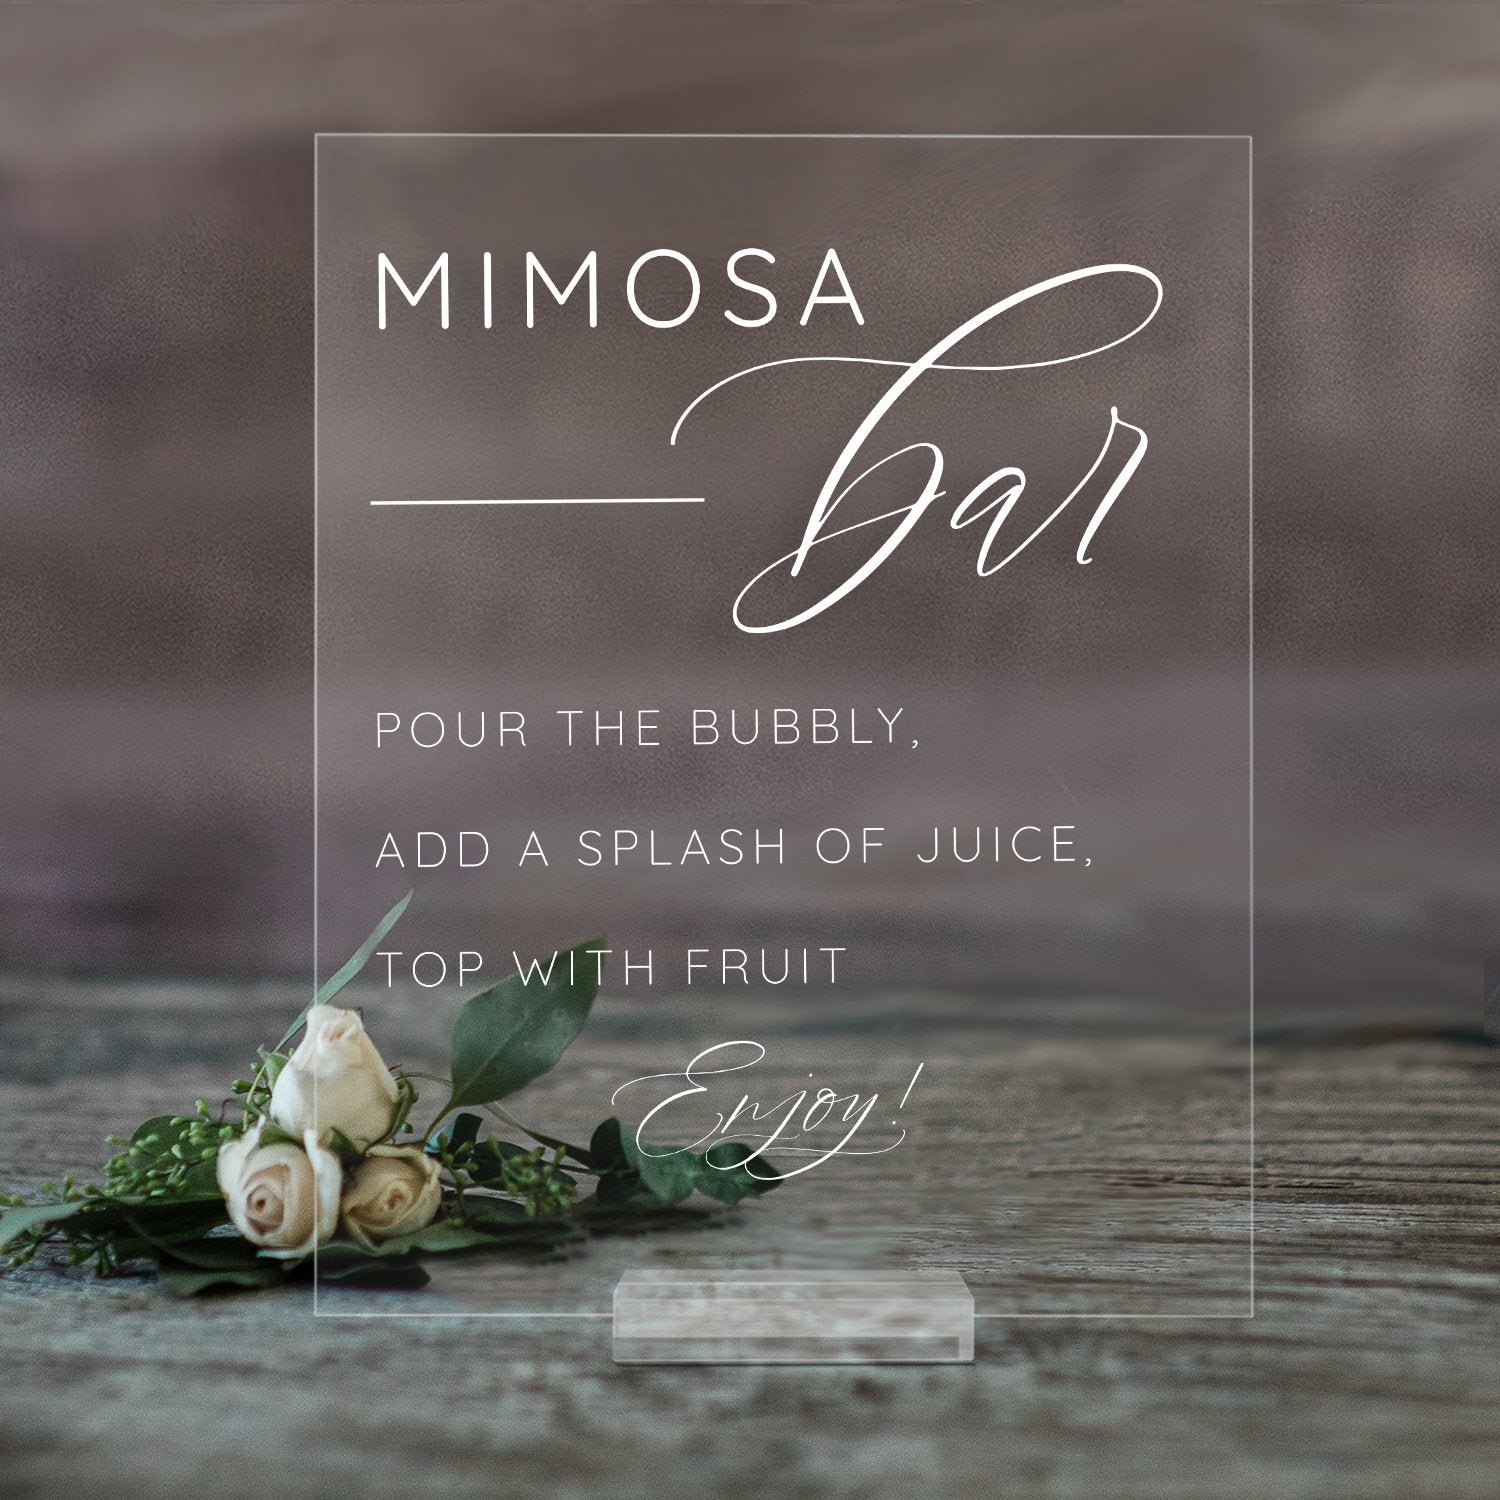 Mimosa Bar Table Sign | Acrylic Wedding Bar Sign | Champagne Bar Engagement Party or Bridal Shower Sign | Acrylic Wedding Sign - SCC-308 - SCC Signs